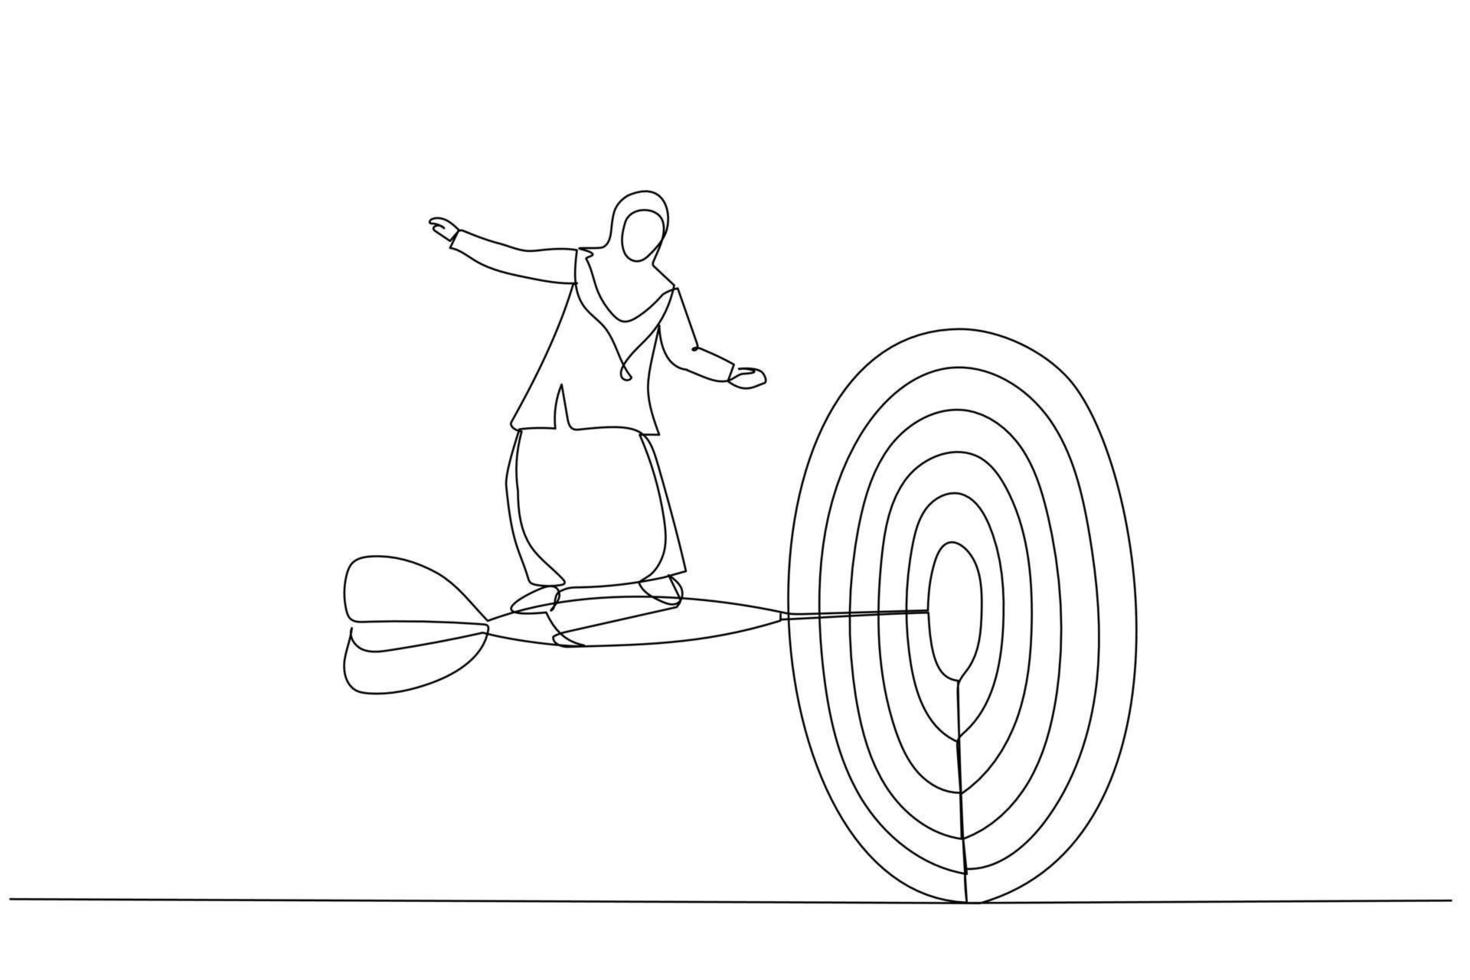 Cartoon of businesswoman with briefcase standing on dart to achieve business goal. Metaphor for solution, achievement, mission, and direction. Single line art style vector